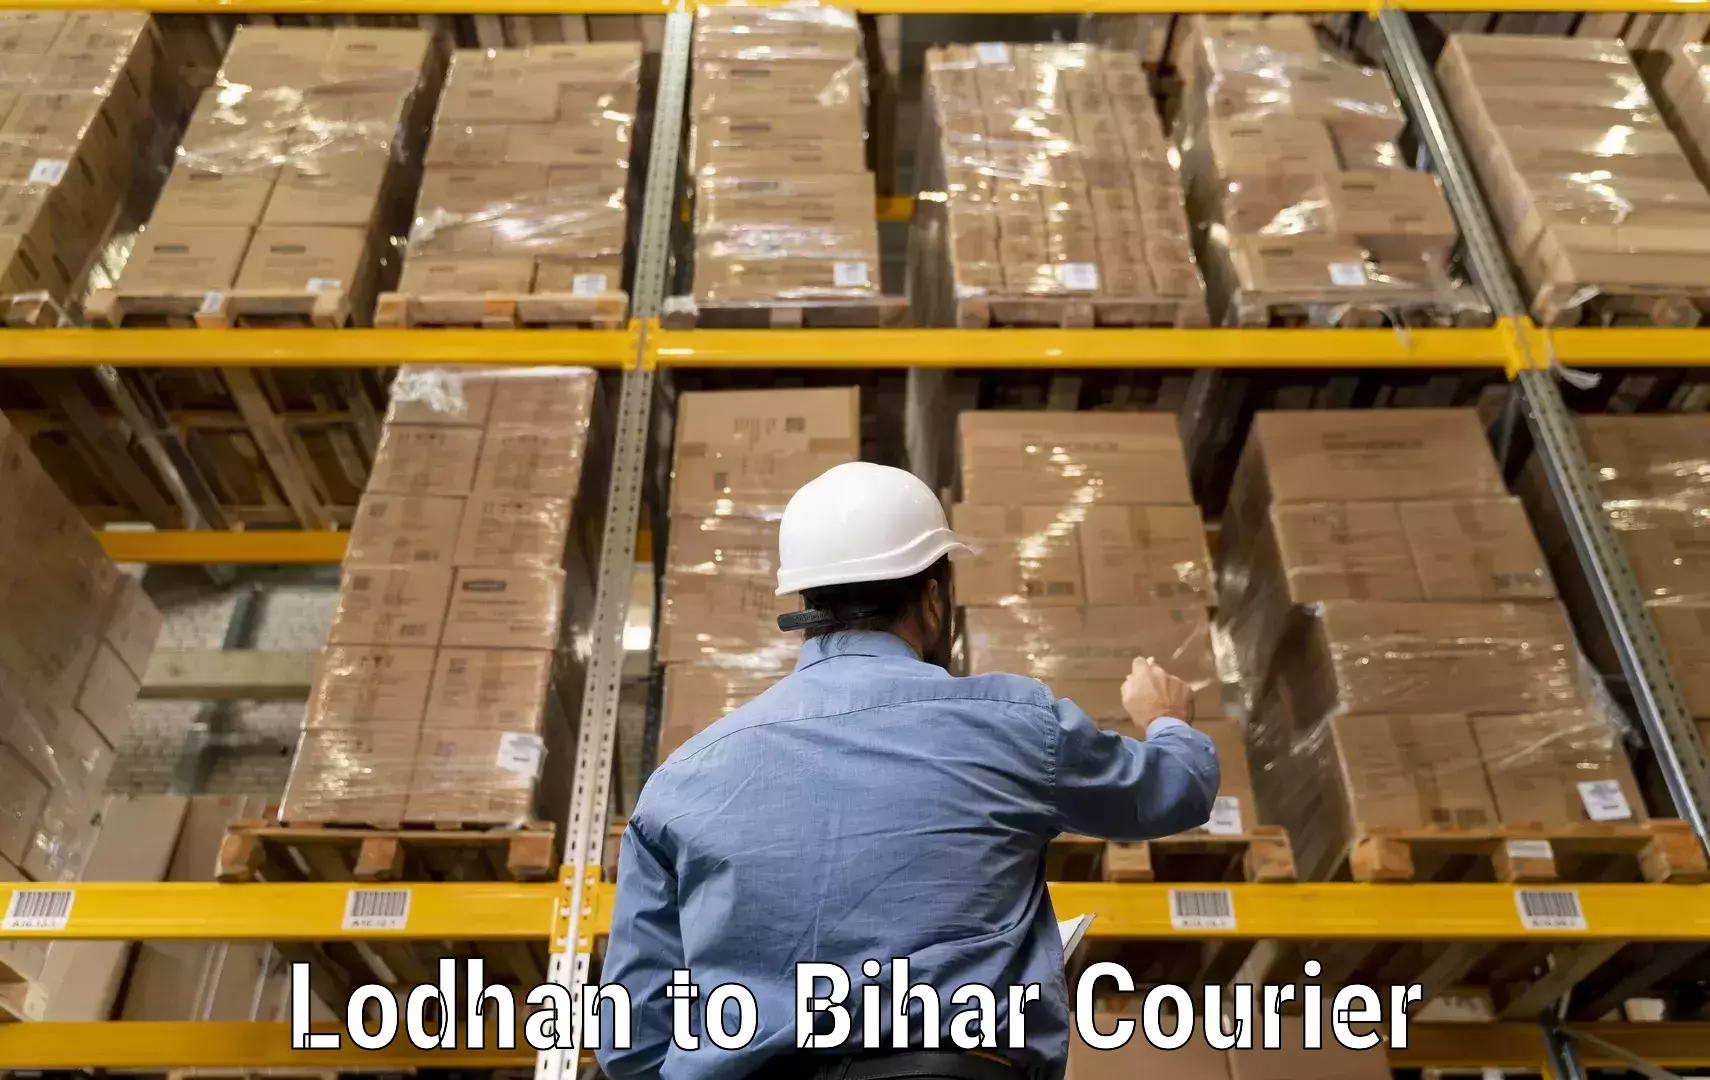 24-hour delivery options Lodhan to Bihar